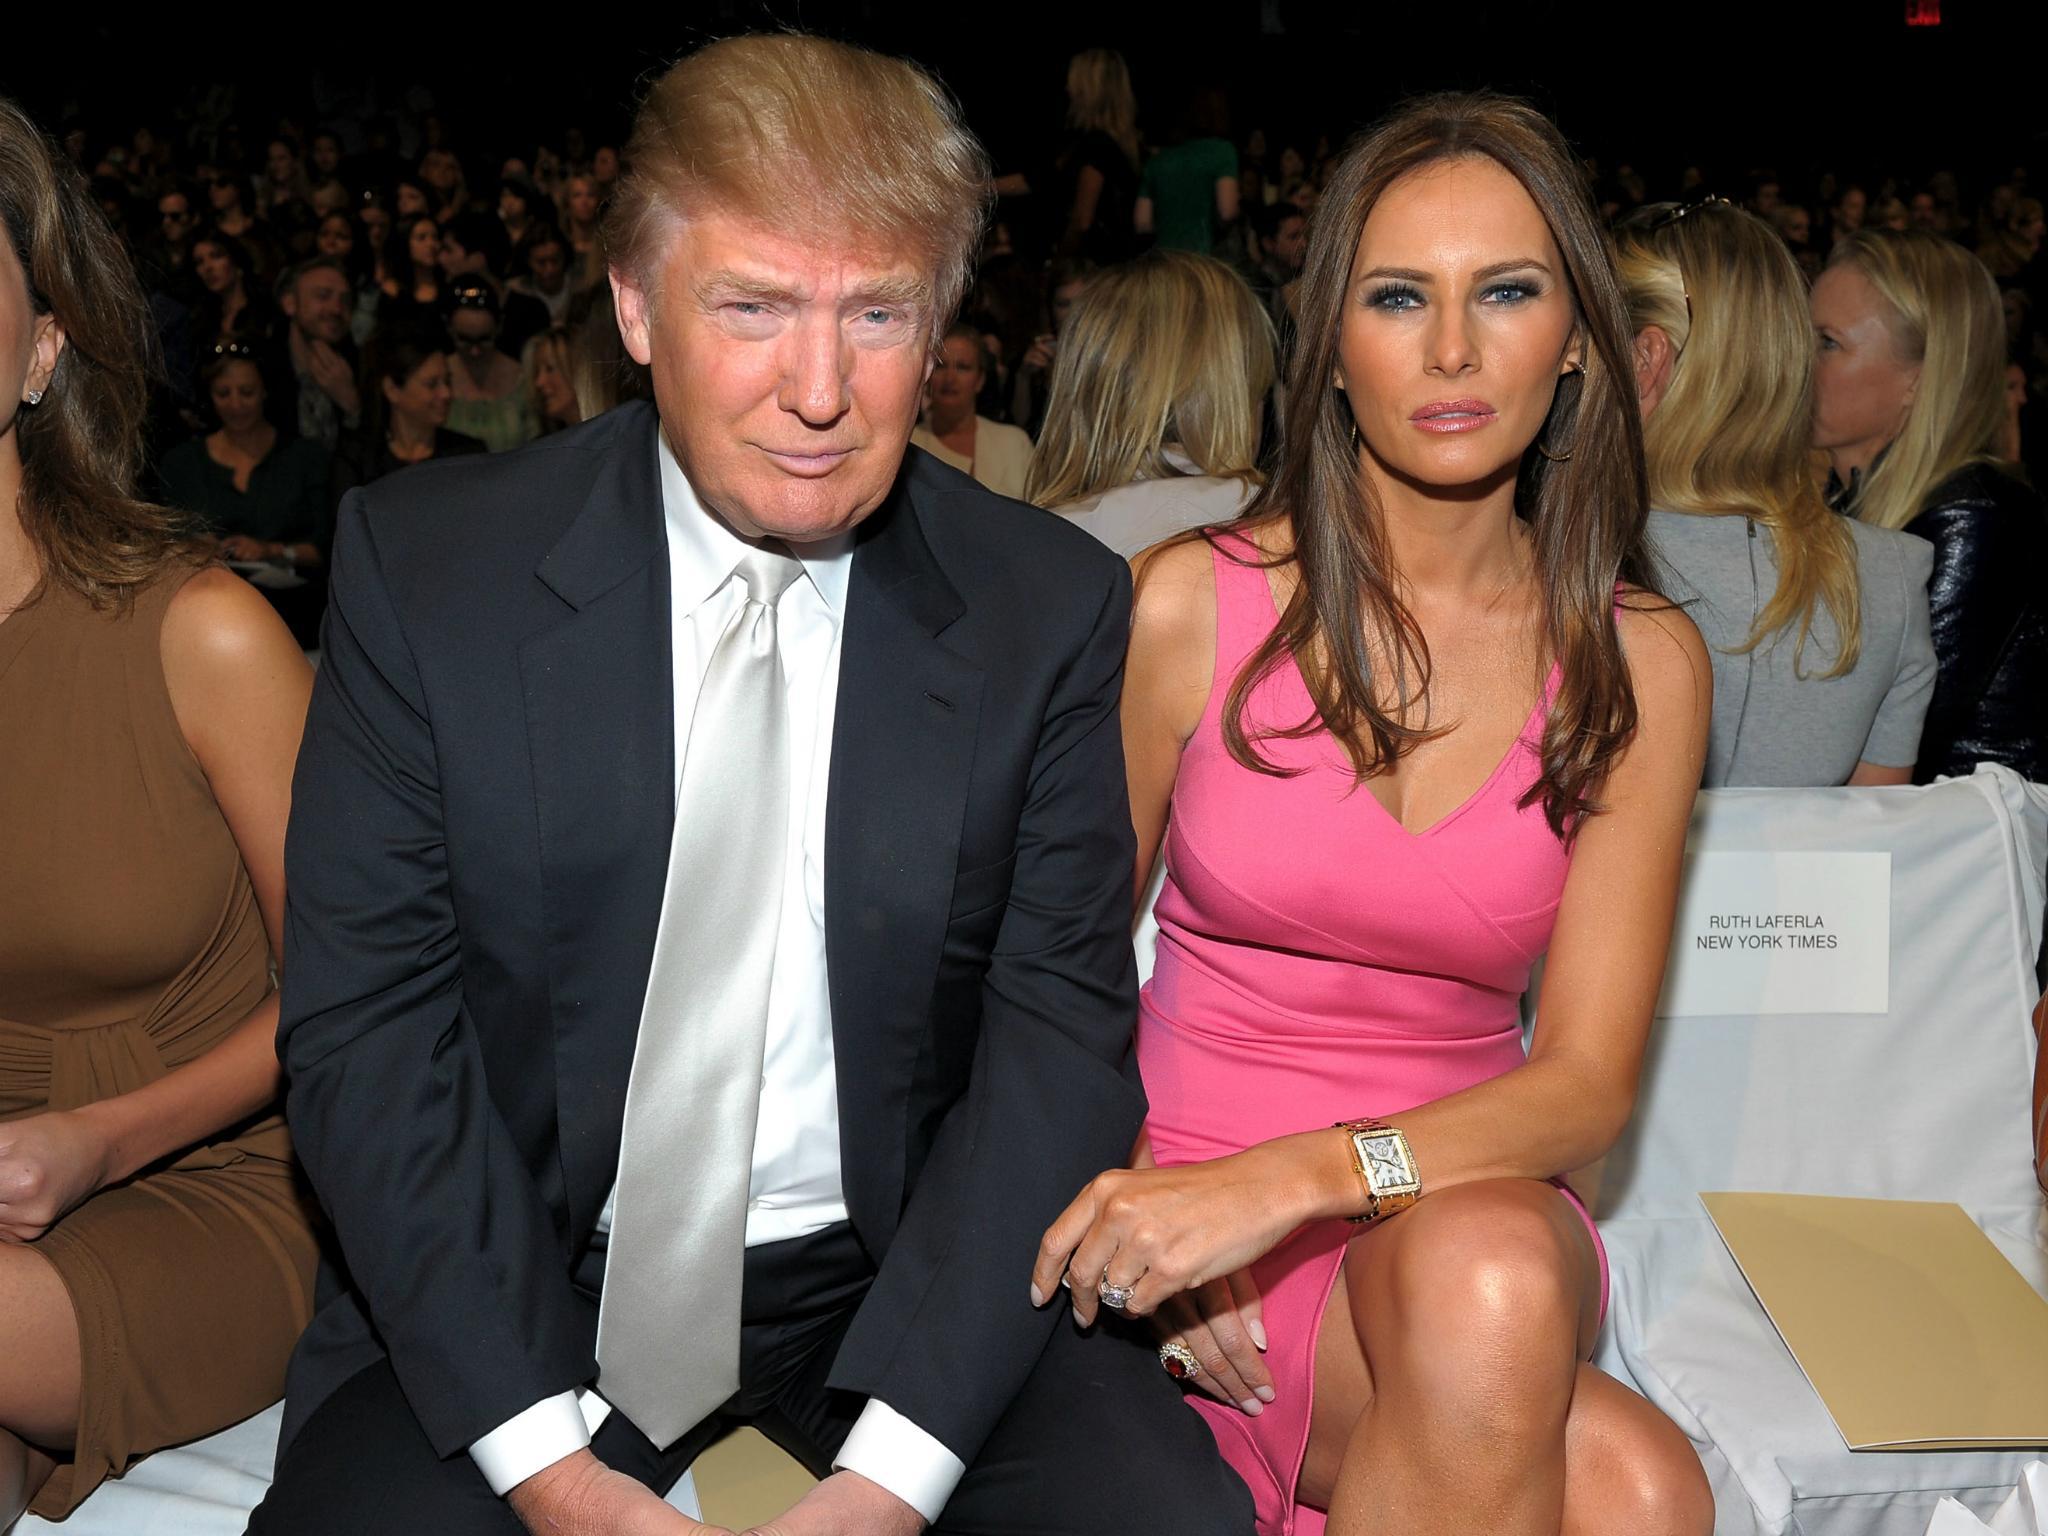 Donald and Melania Trump at a Fashion Week event in 2011 Michael Loccisano/Getty